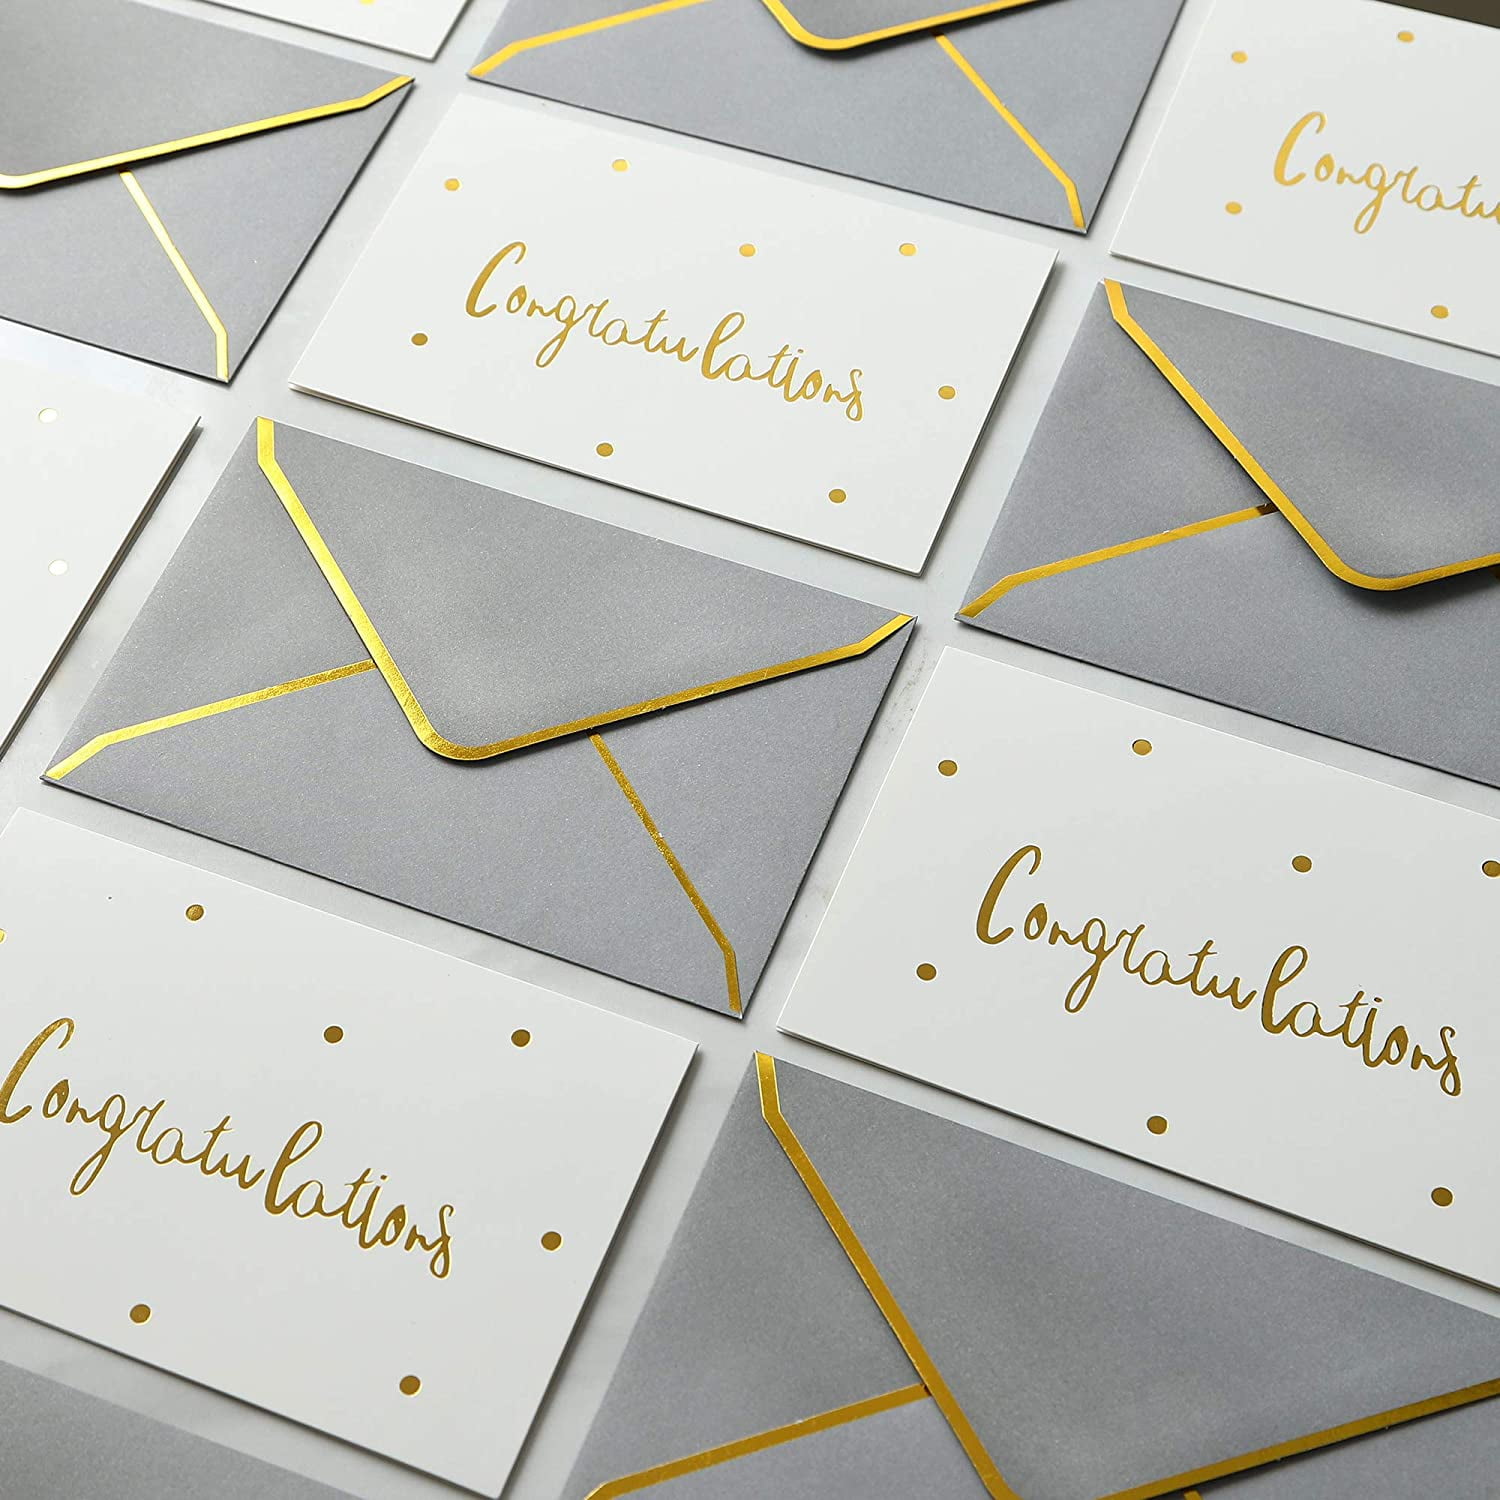 Congratulations Cards with Envelopes Graduation Cards Pack New Home Card All Occasion Greeting Cards Greeting Card Assorted Greeting Cards 36 PK BLACK 